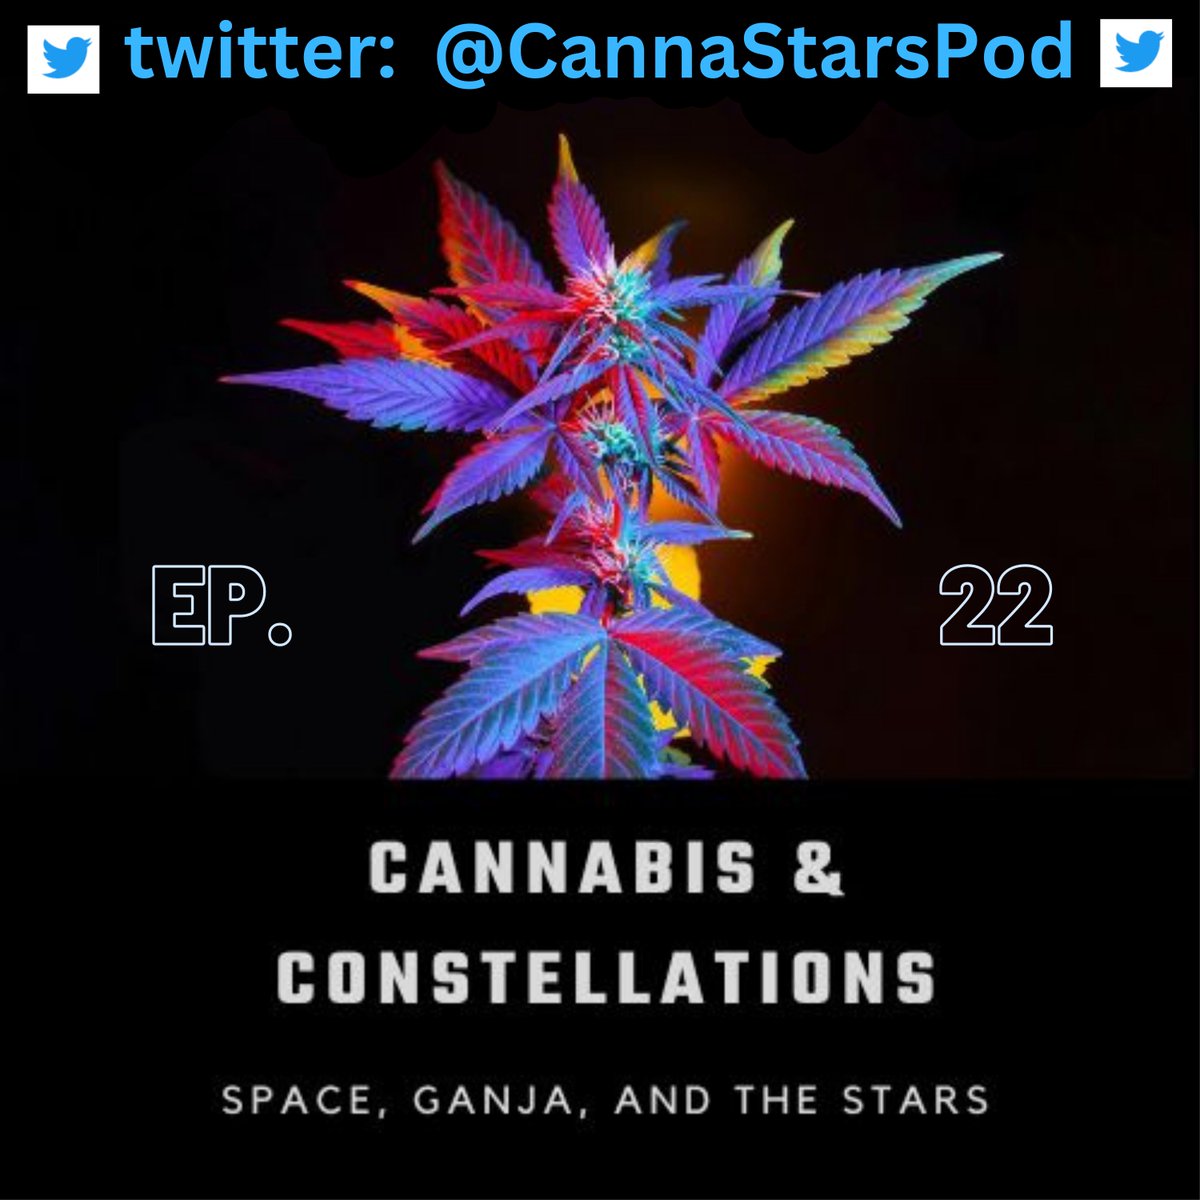 have you ever seen a star move? 👀----
#CannabisAndConstellations #Aviation #Space #SpaceTravel #MentalHealth #MentalIllness #SelfImprovement #CannabisCulture #Aerospace #Astronomy #Wellness #Psychedelics #Astrophysics #SelfHelp #Marijuana #Health #Mindfulness #ScienceFiction